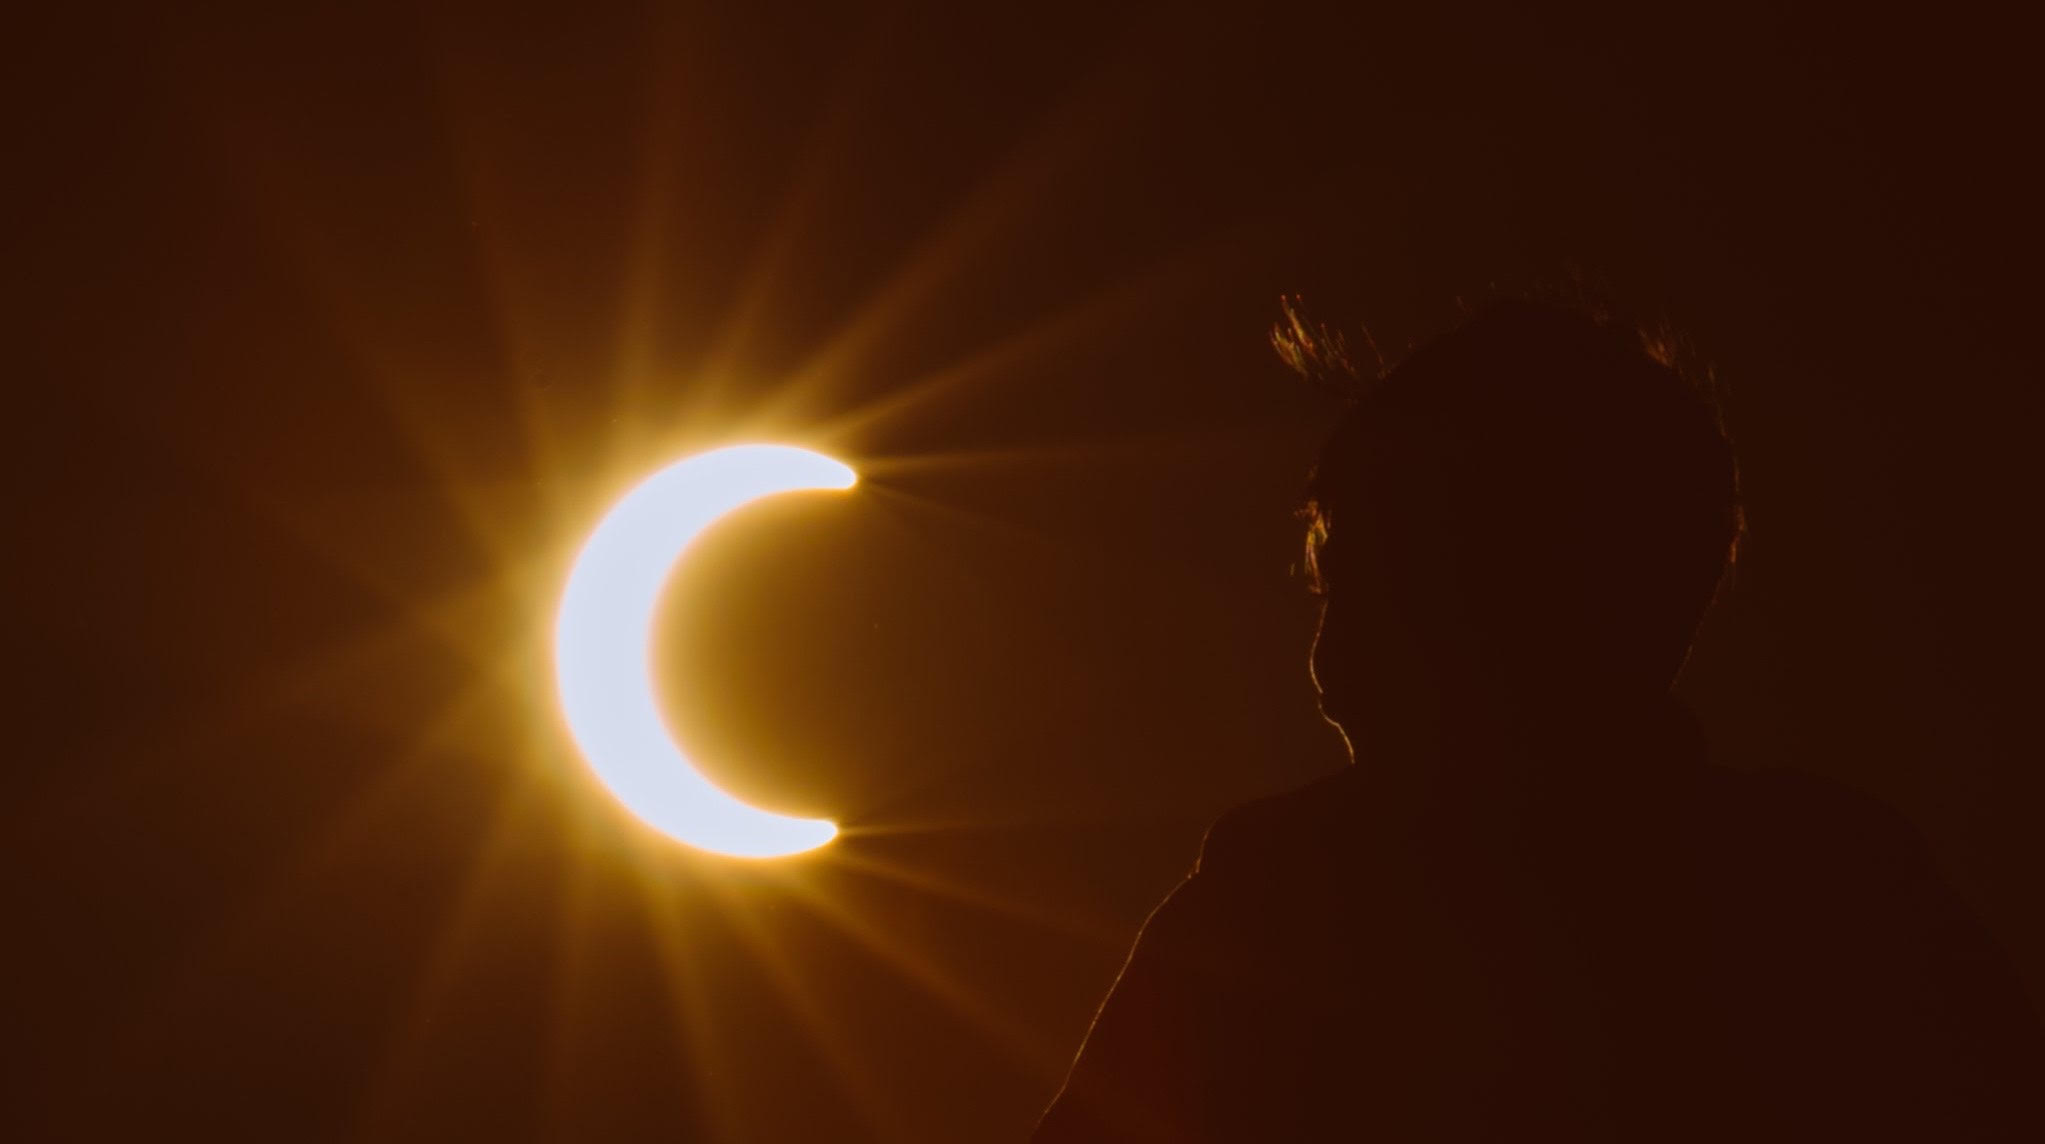 Oman to witness another annular solar eclipse in 2020